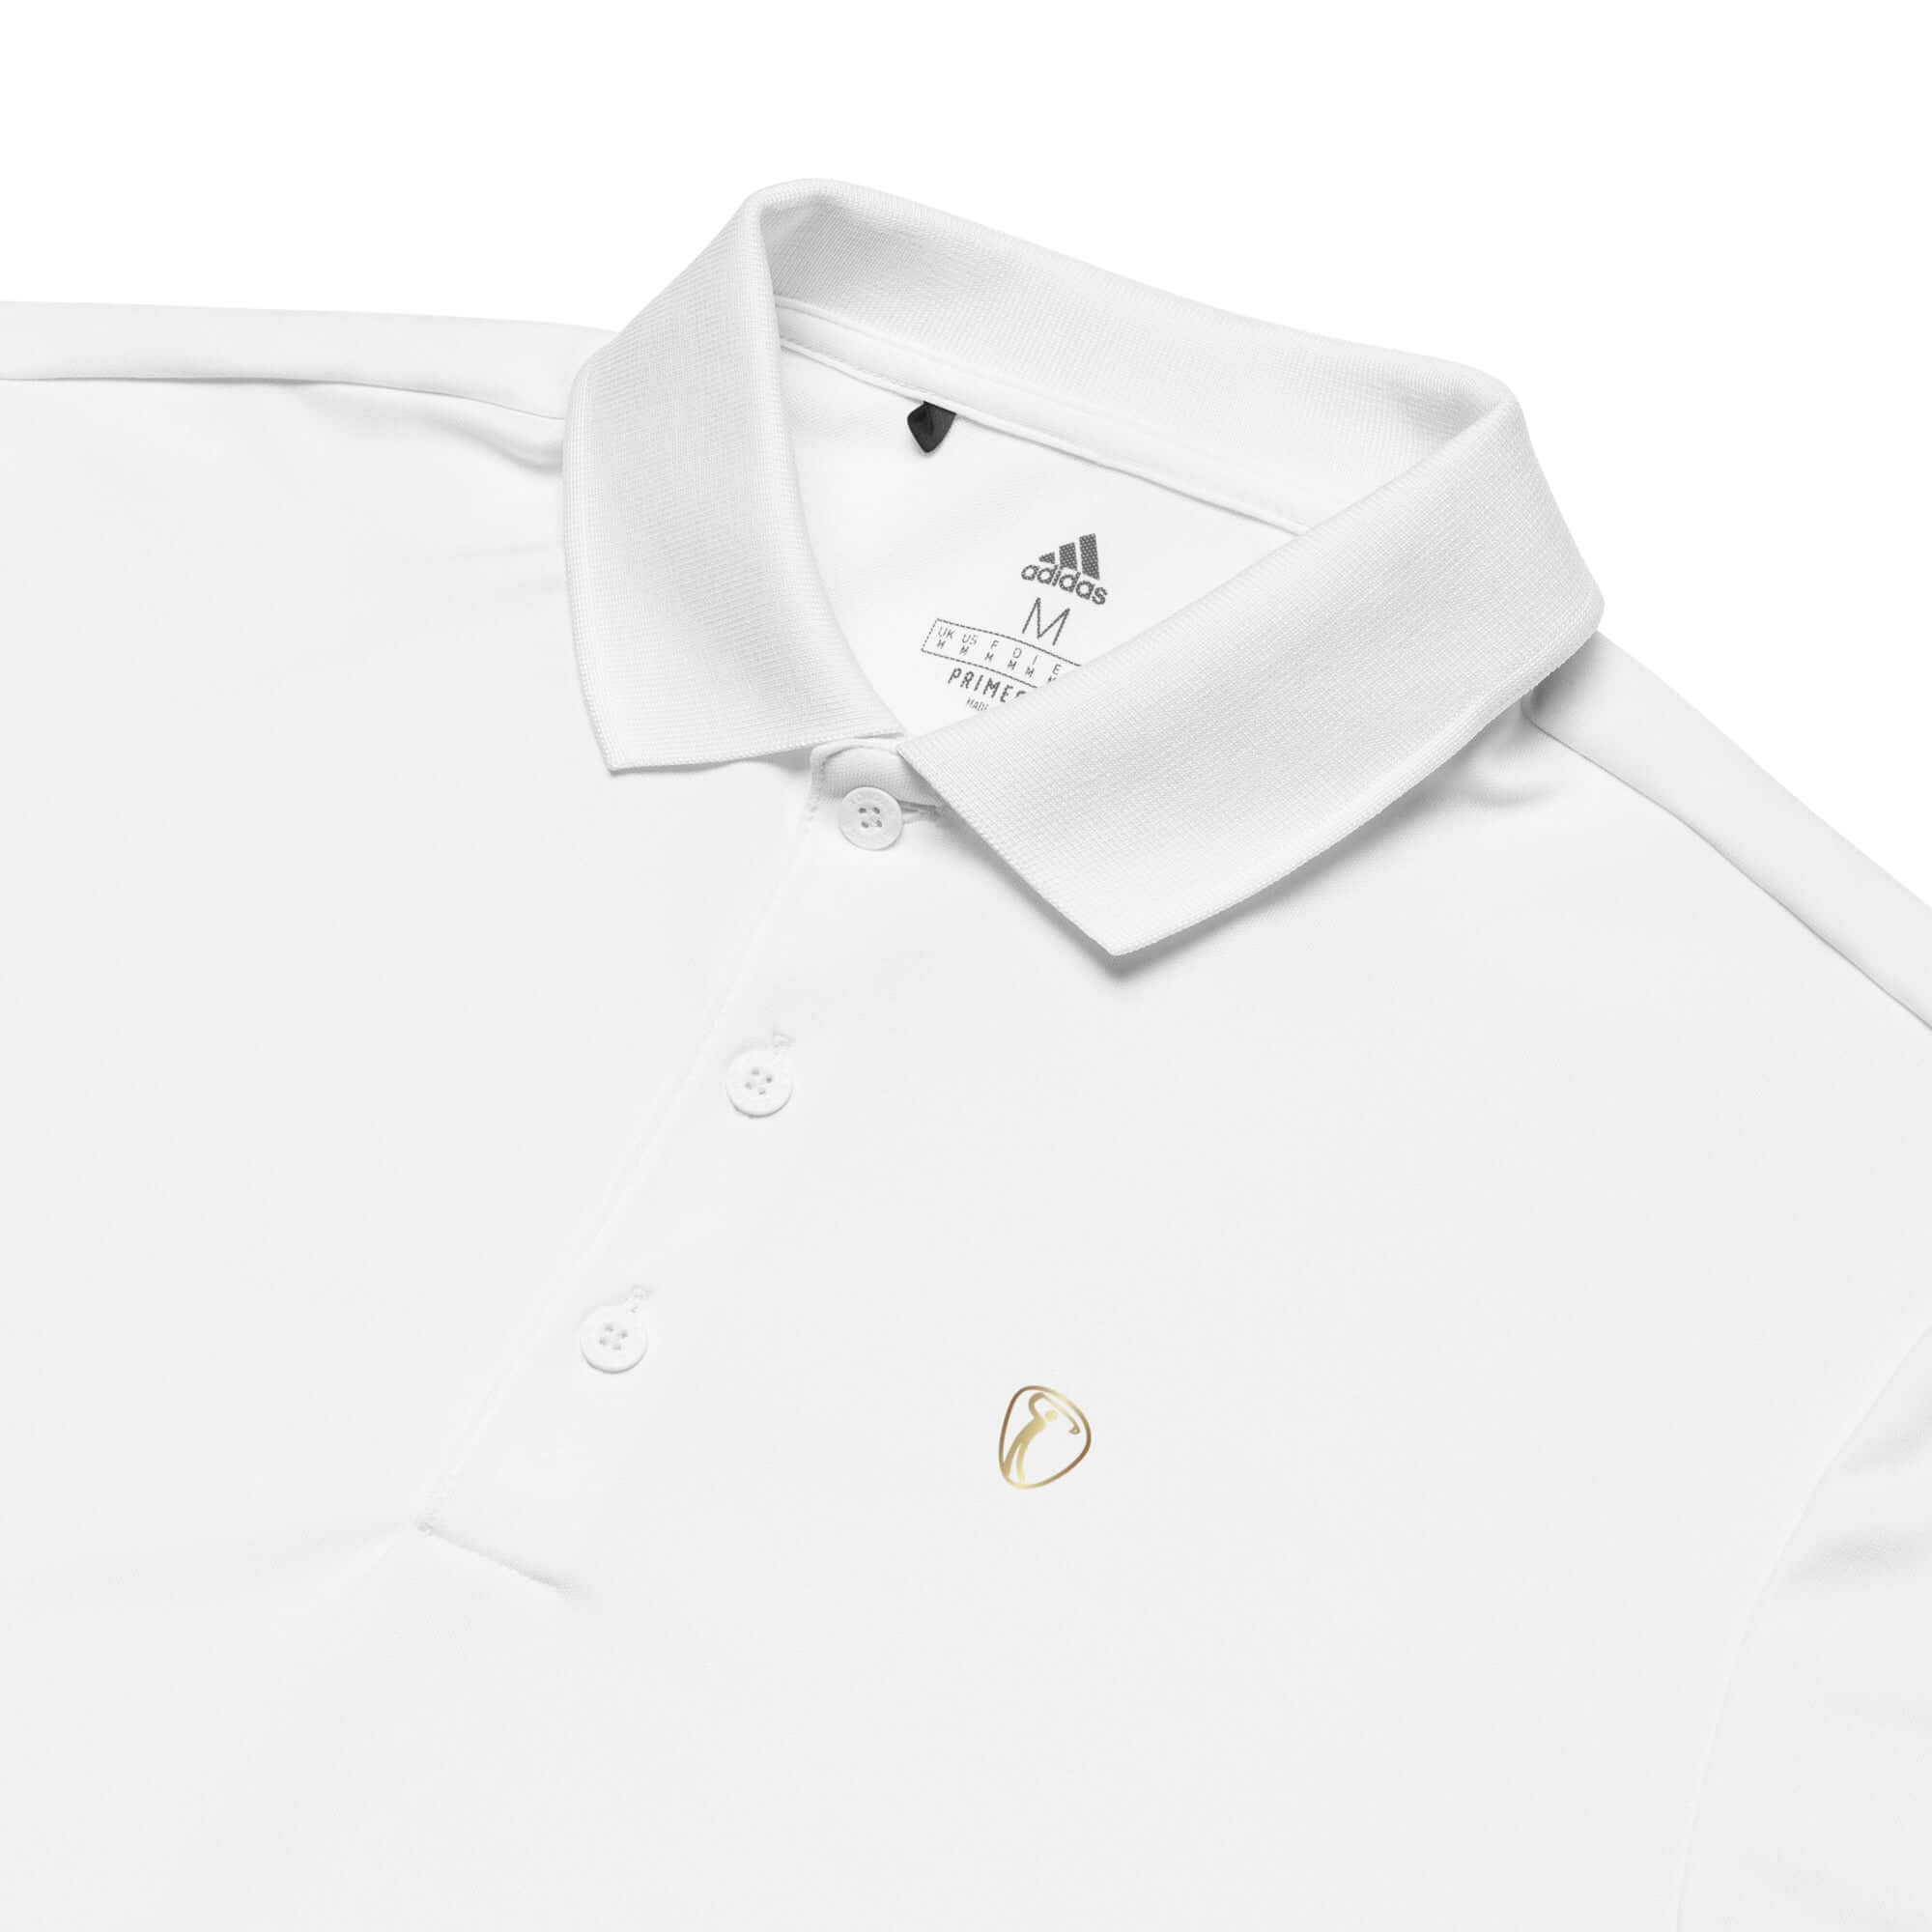 Adidas x Forefrontier Polo – Performance ForeFrontier Golf Shirt